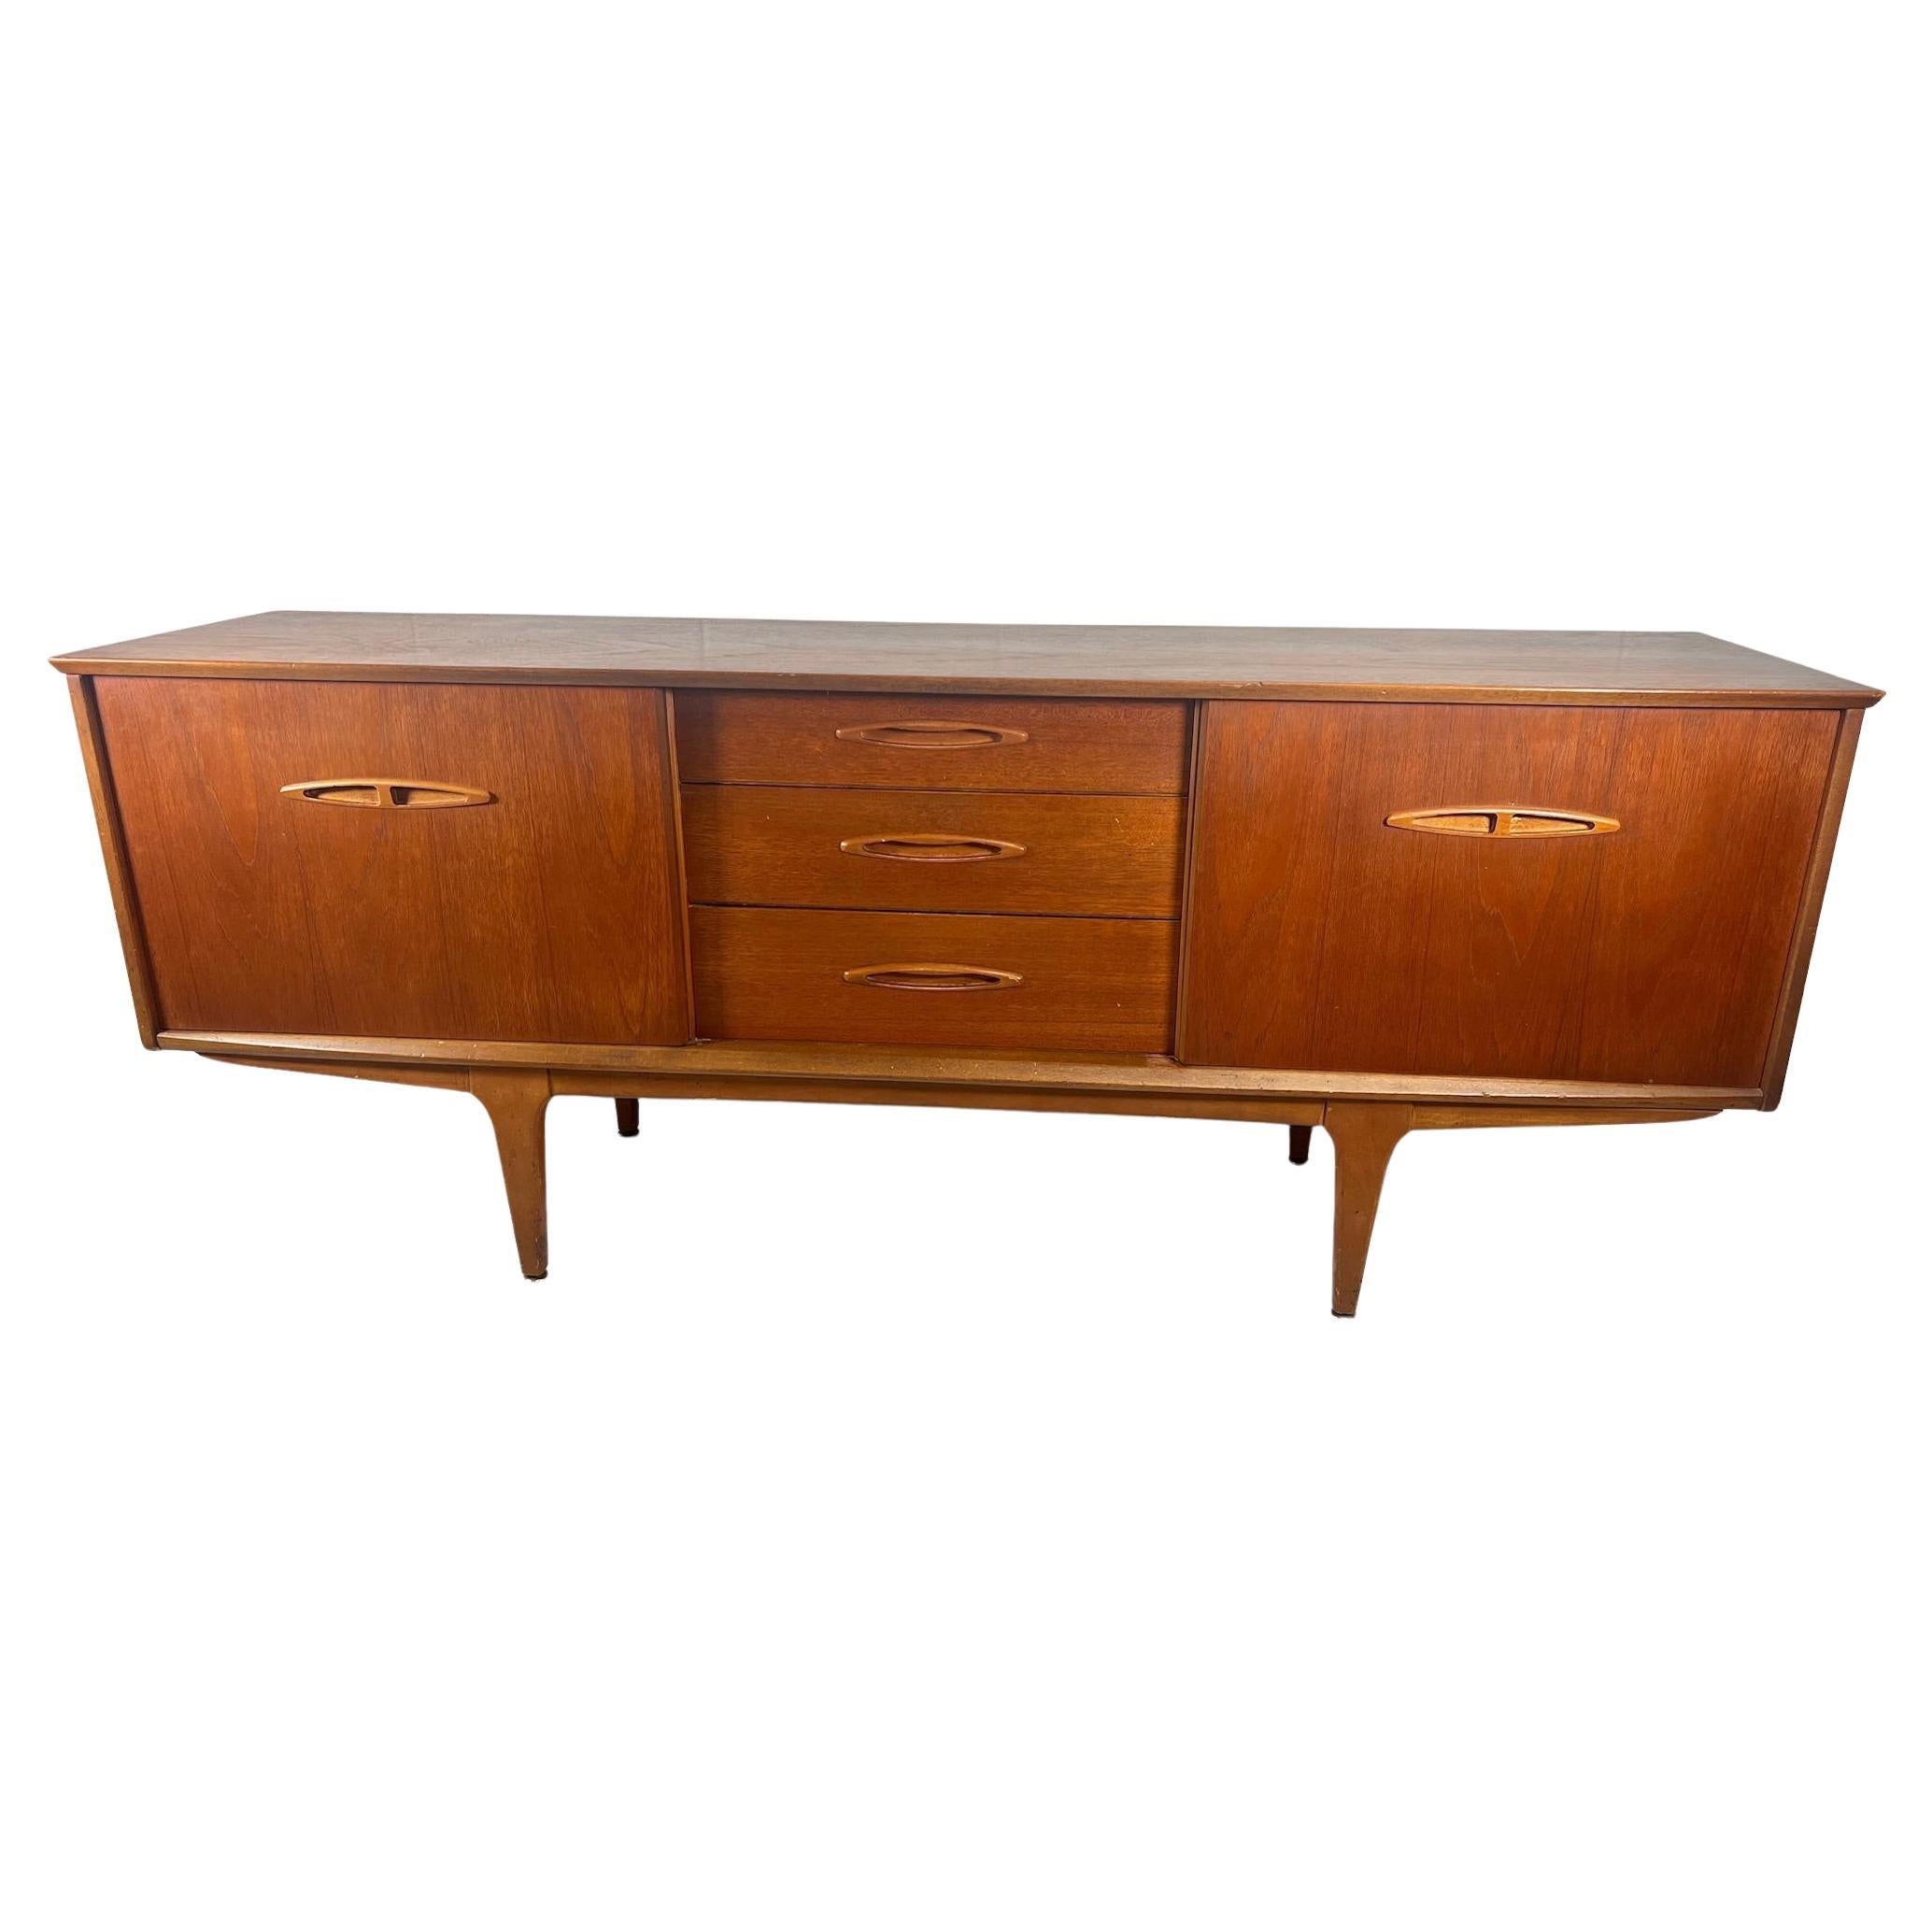 Mid Century Modern Teak Credenza Sliding Doors By Jentique Made in England